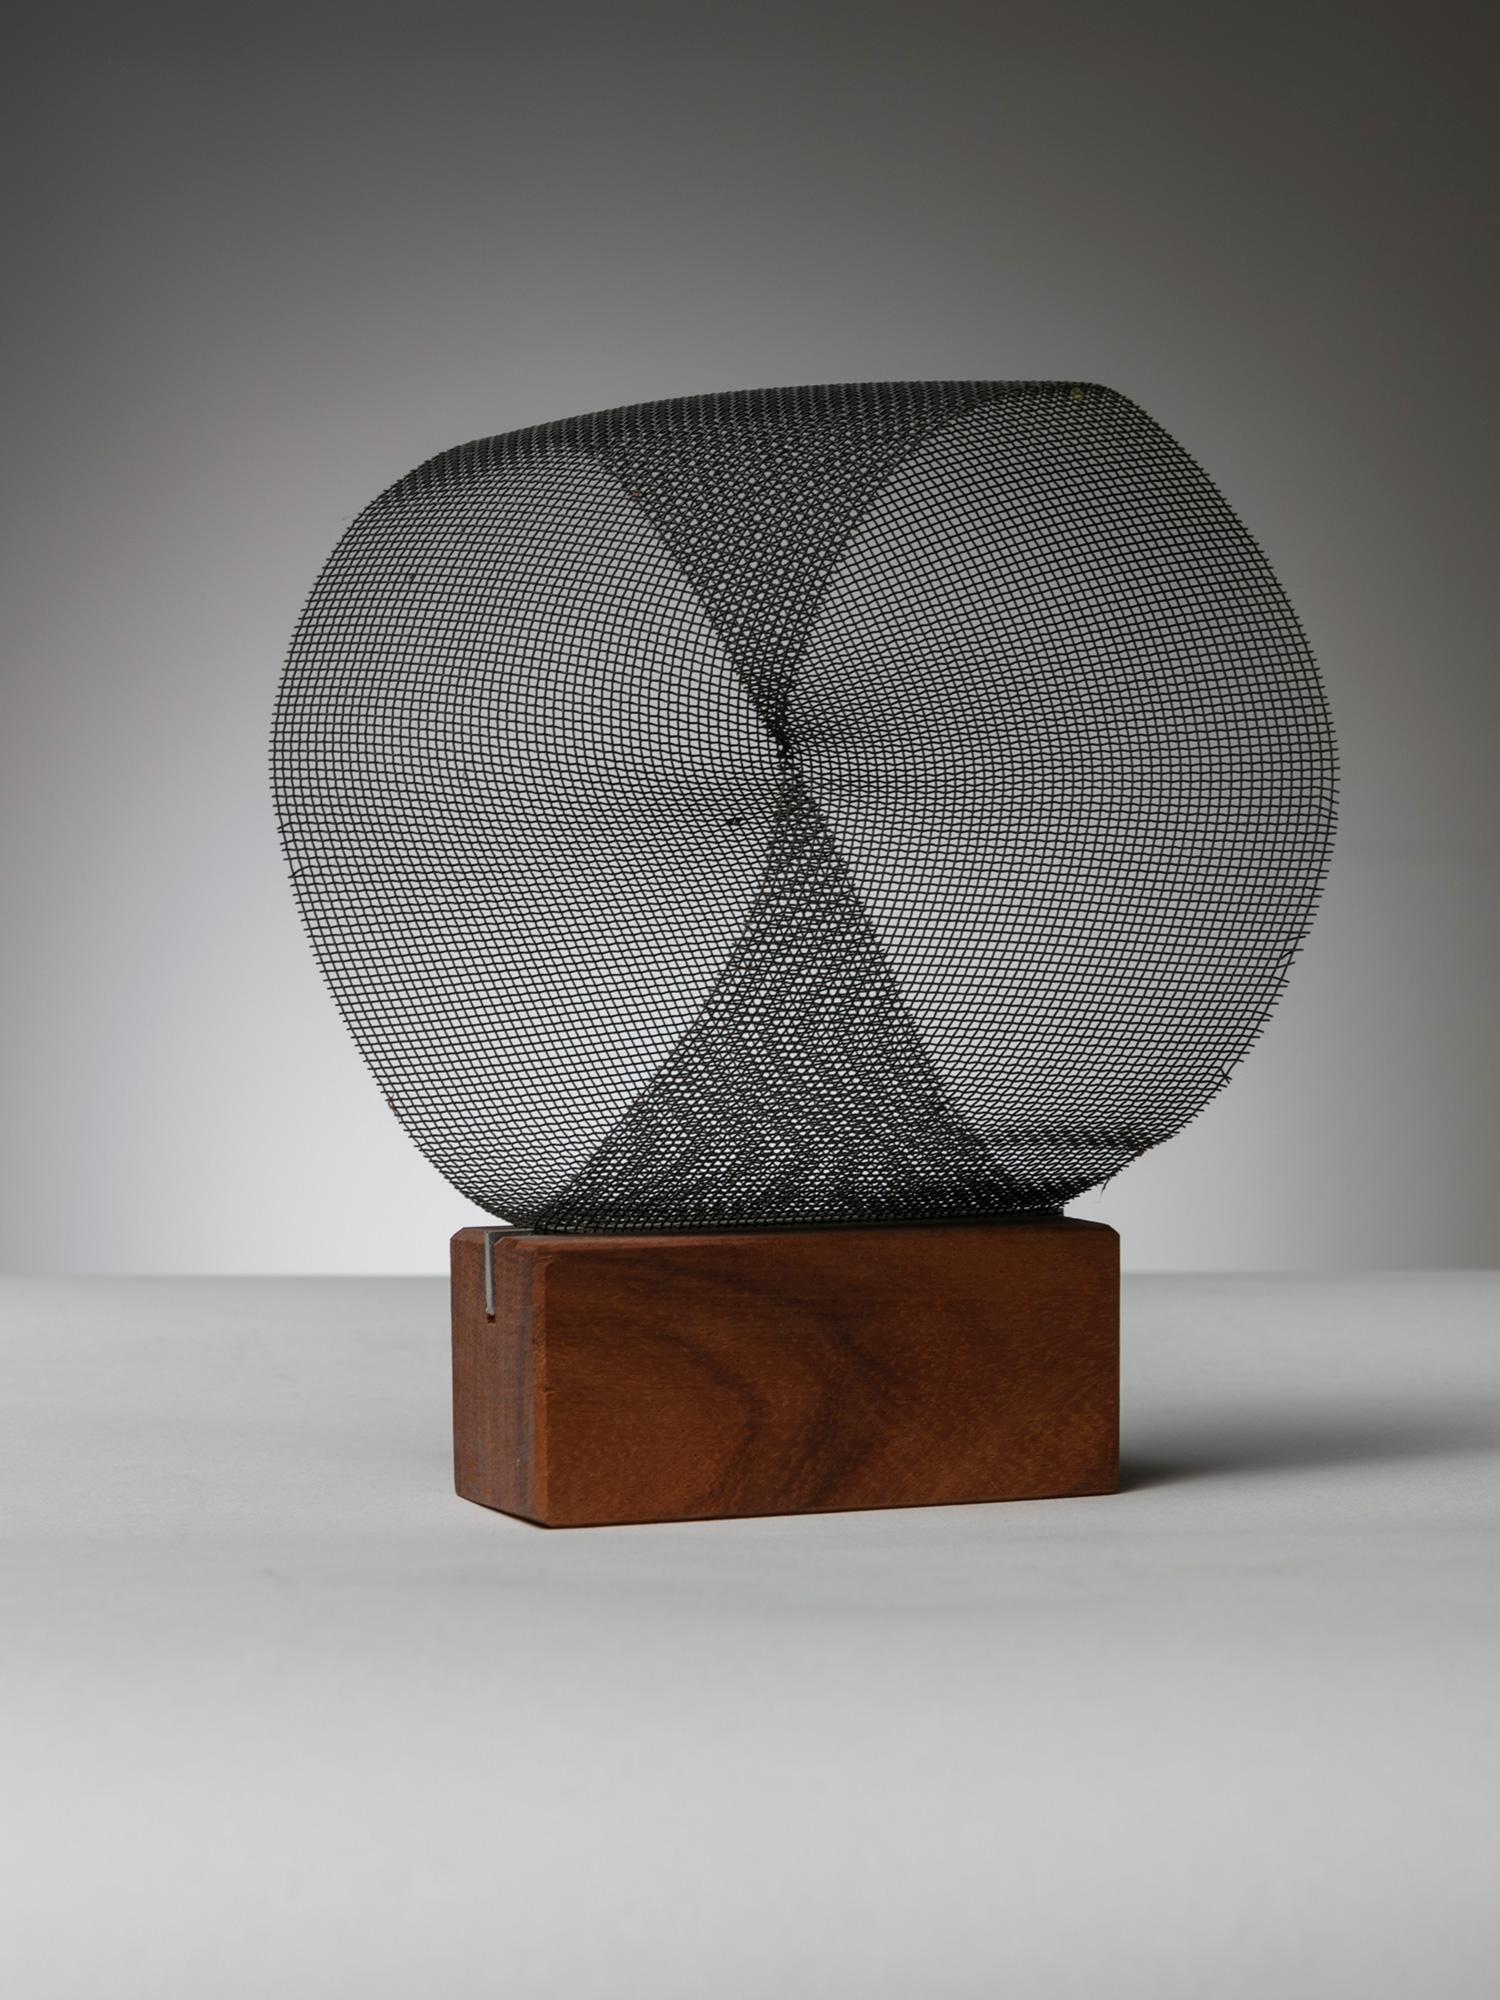 Italian Metal and Wood Op Art Sculpture, Italy, 1960s For Sale